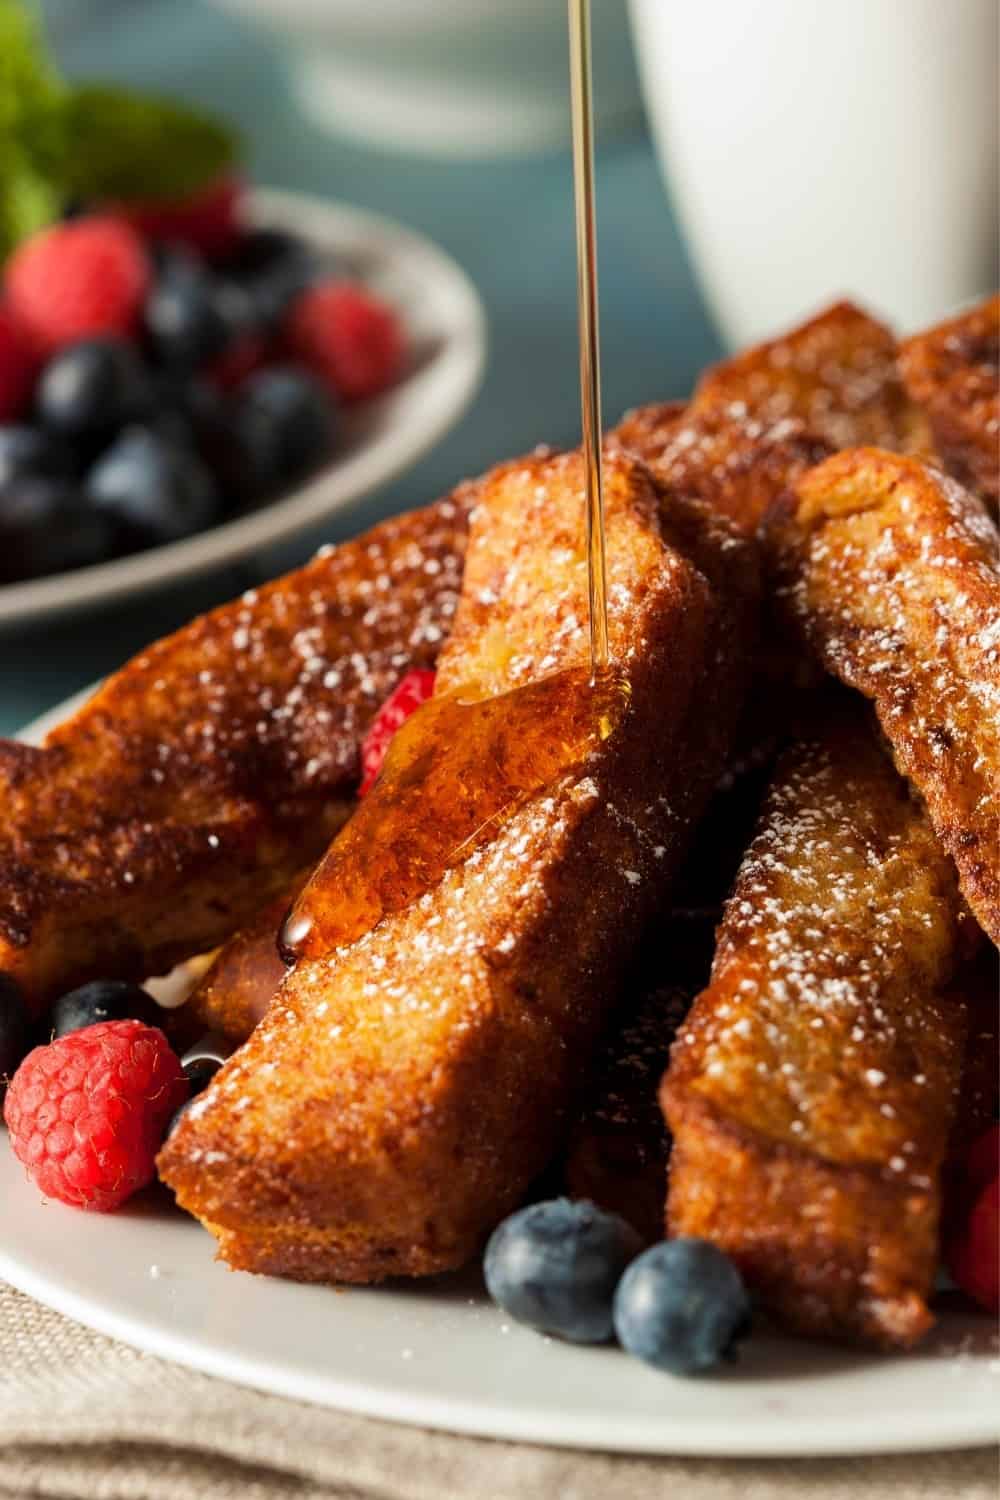 How to Cook Frozen French Toast Sticks in the Air Fryer